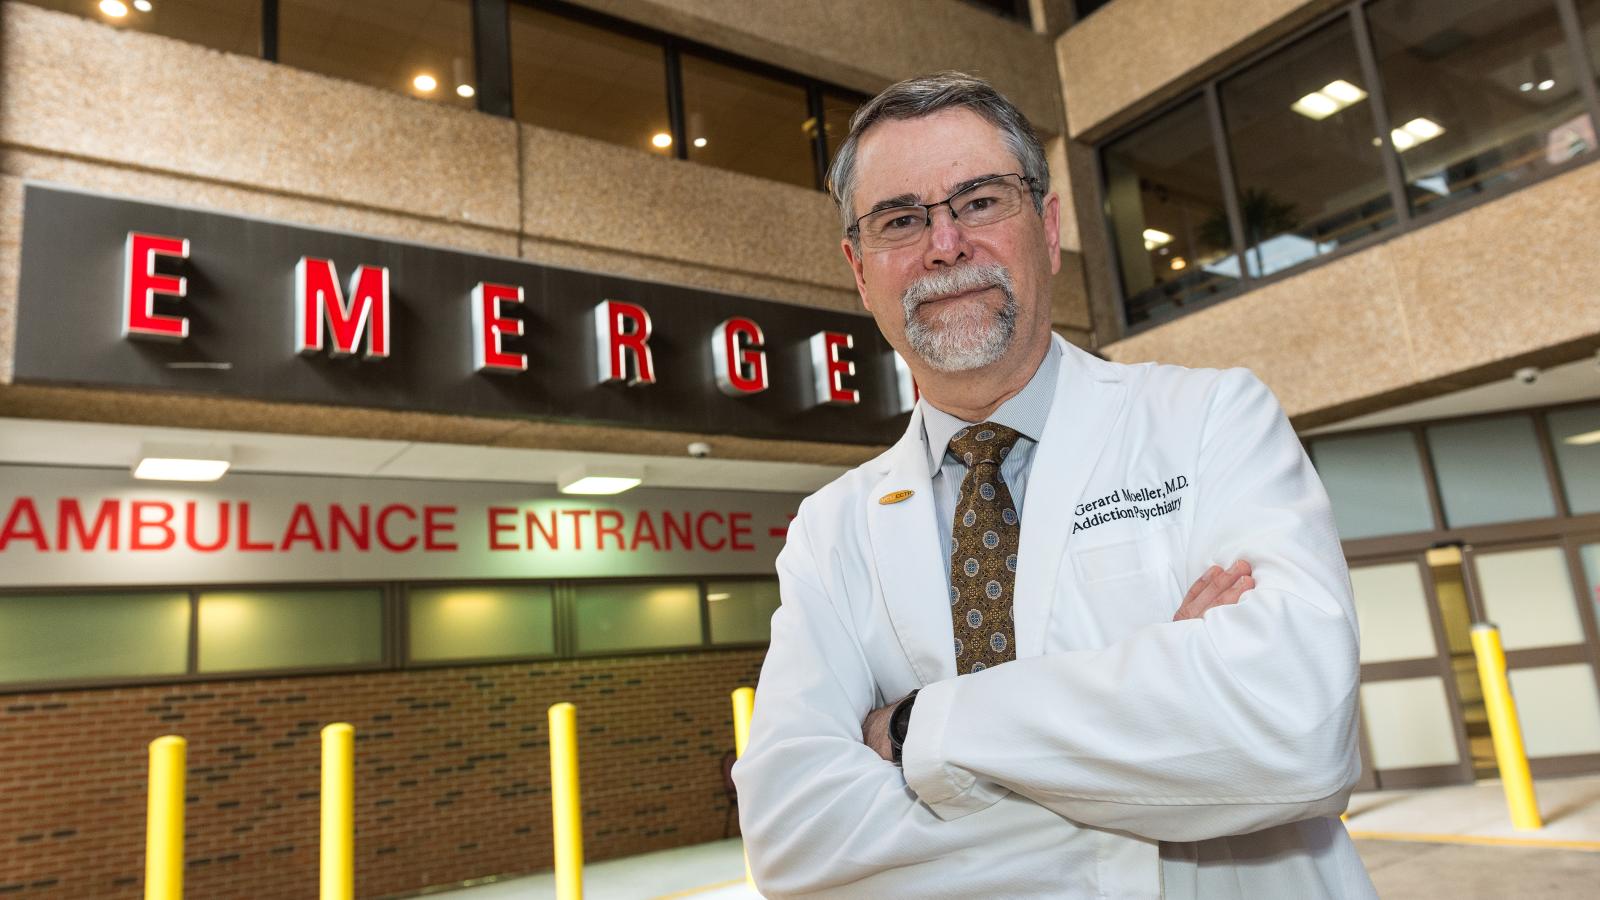 F. Gerard “Gerry” Moeller, M.D., director of the VCU C. Kenneth and Dianne Wright Center for Clinical and Translational Research, is the principal investigator on a clinical trial that is initiating long-term care for opioid overdose survivors inside emergency departments. Photo: Kevin Schindler